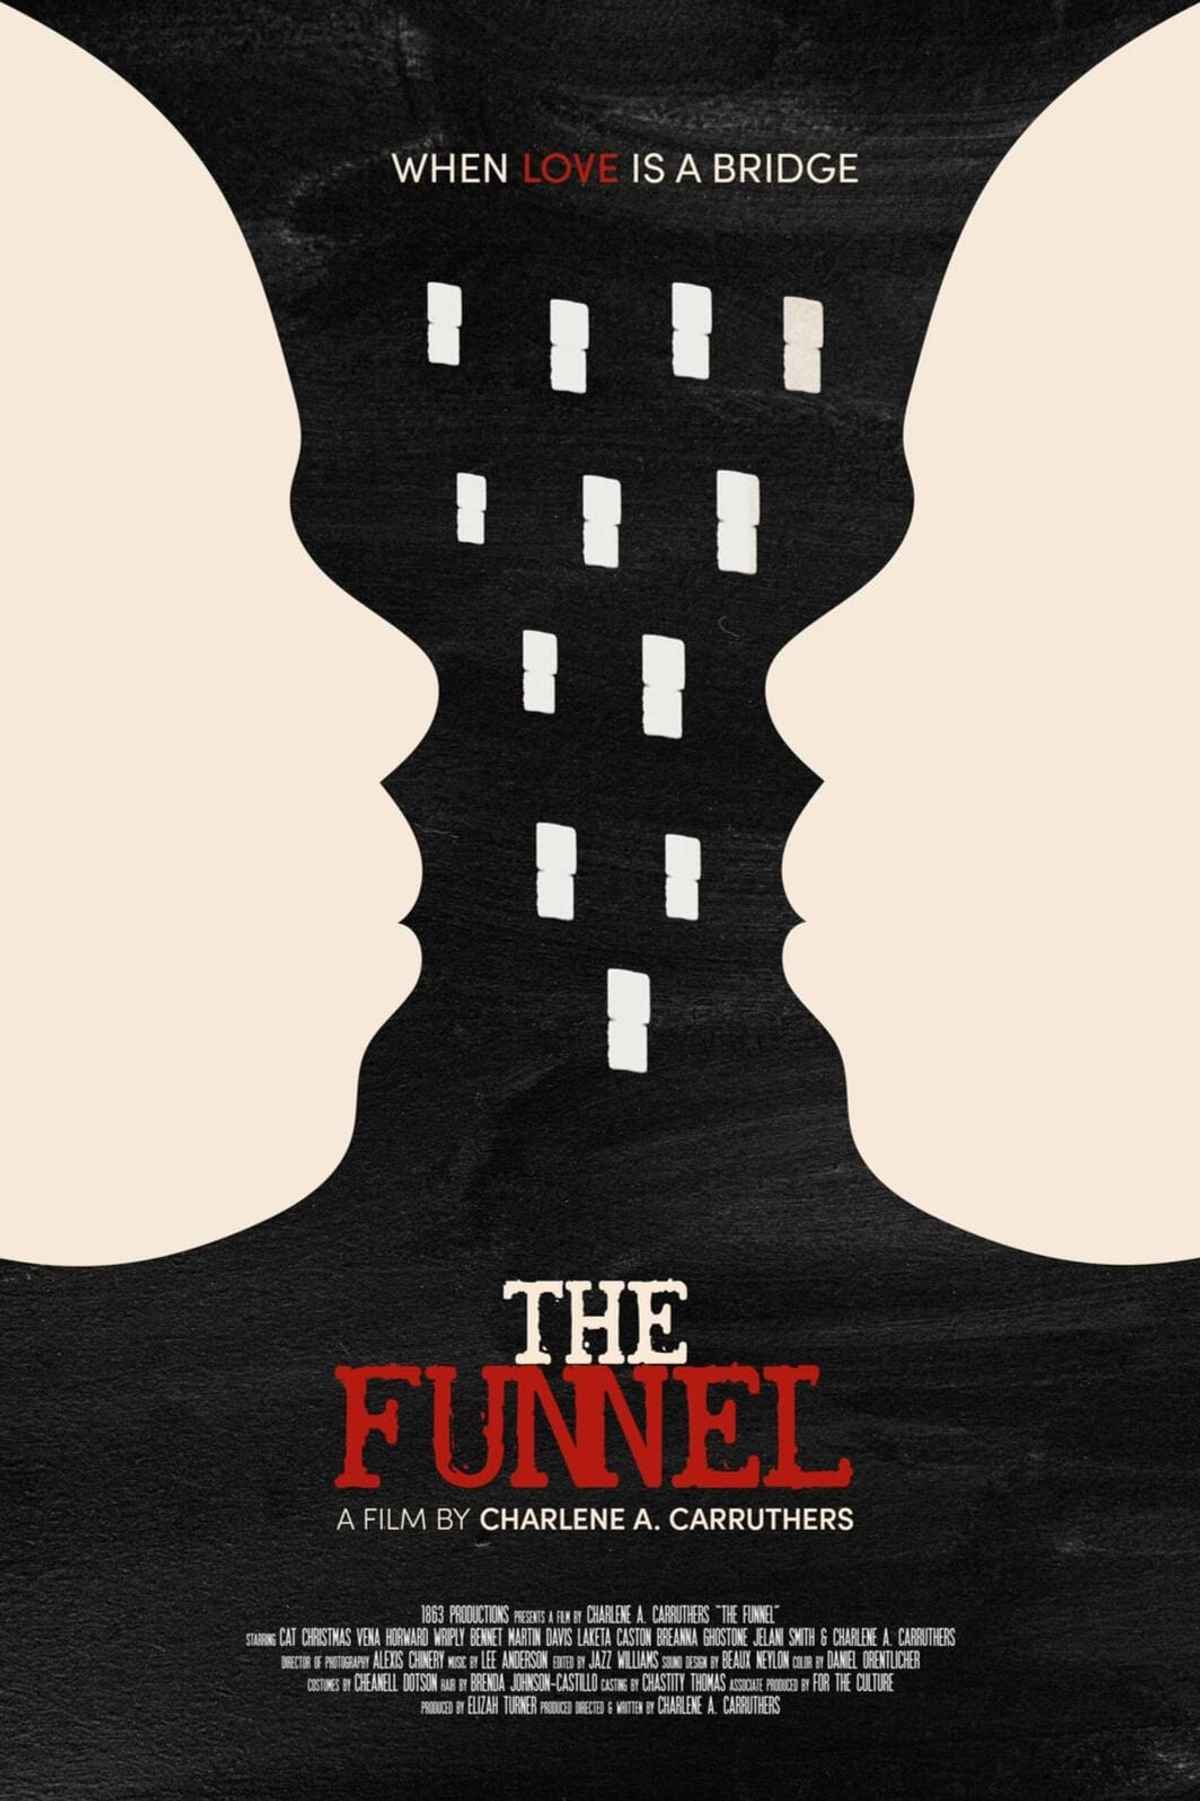 The Funnel